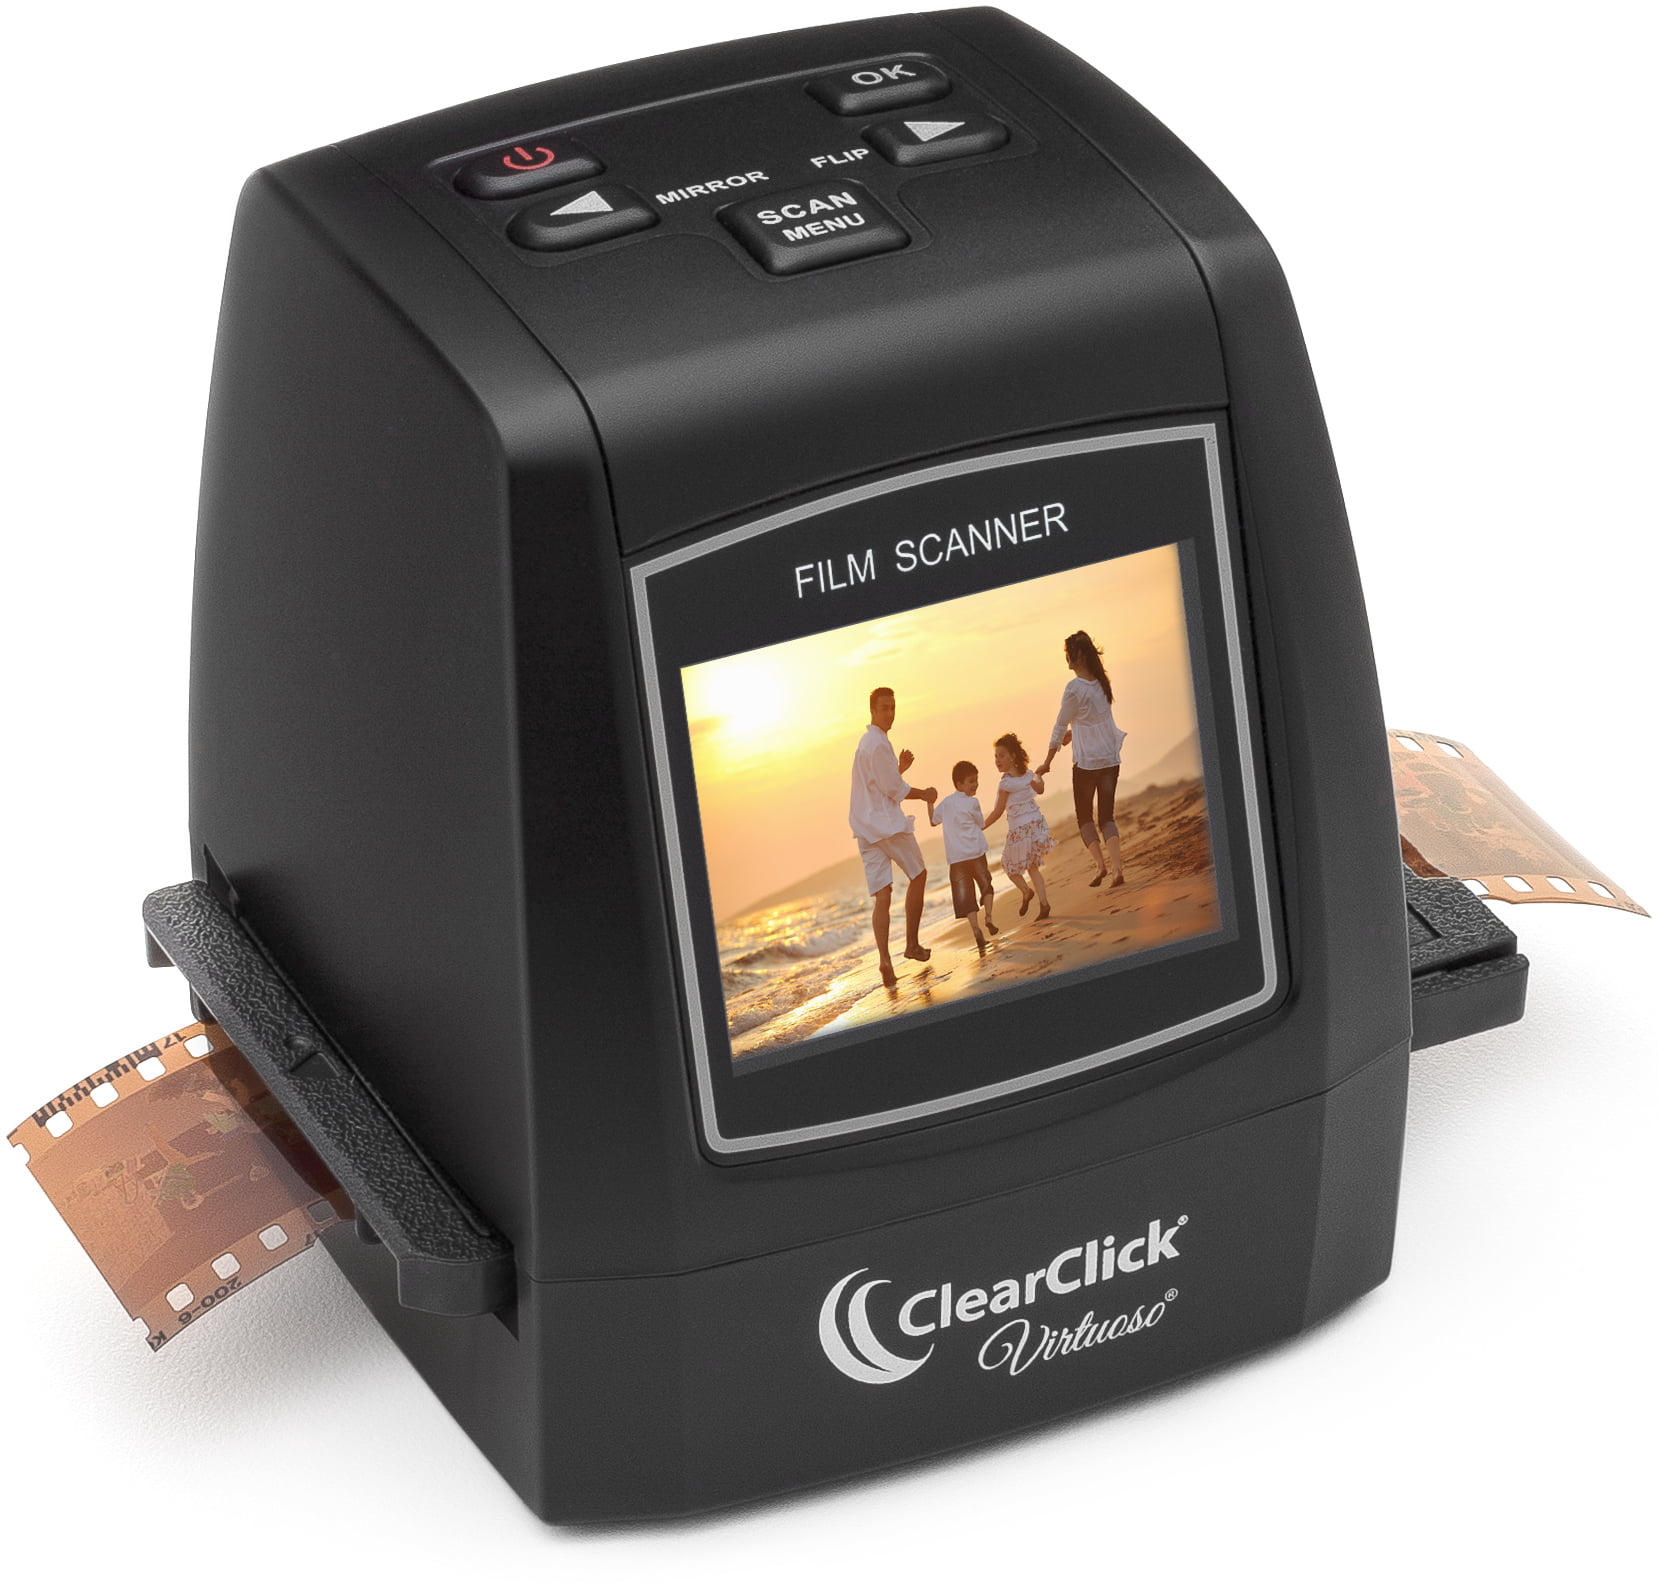 ClearClick 22MP Virtuoso Film & Slide Scanner with PhotoPad Software & 8 GB Memory Card - Compatible with 35mm, 110, 126, & Super - Walmart.com